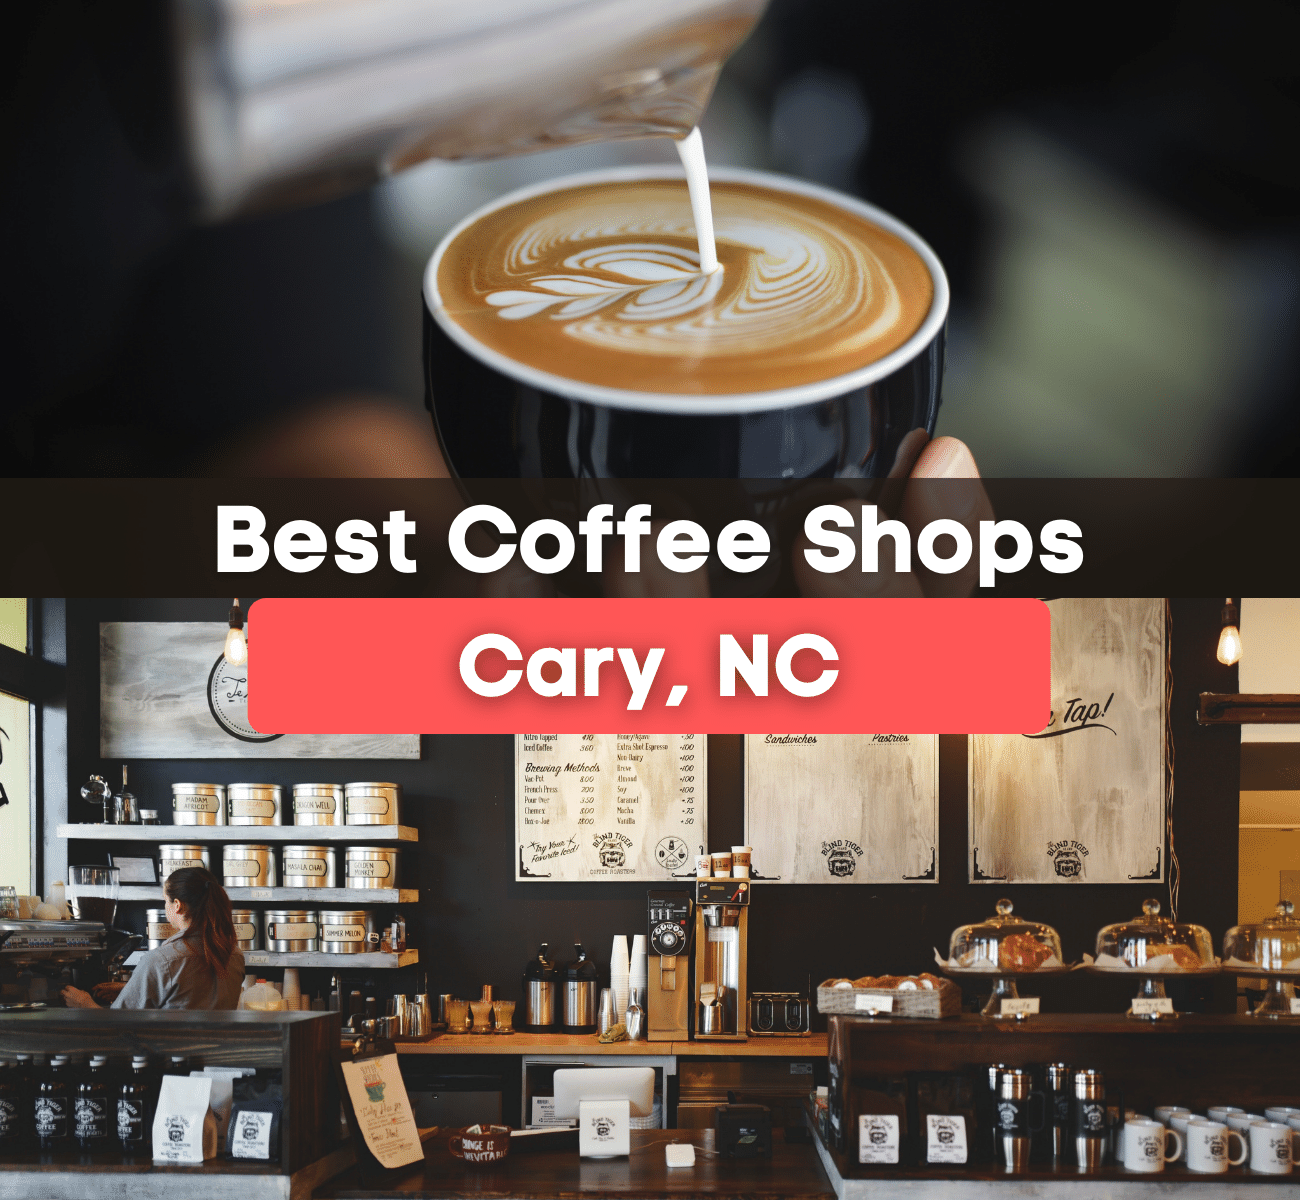 pouring coffee and coffee shop